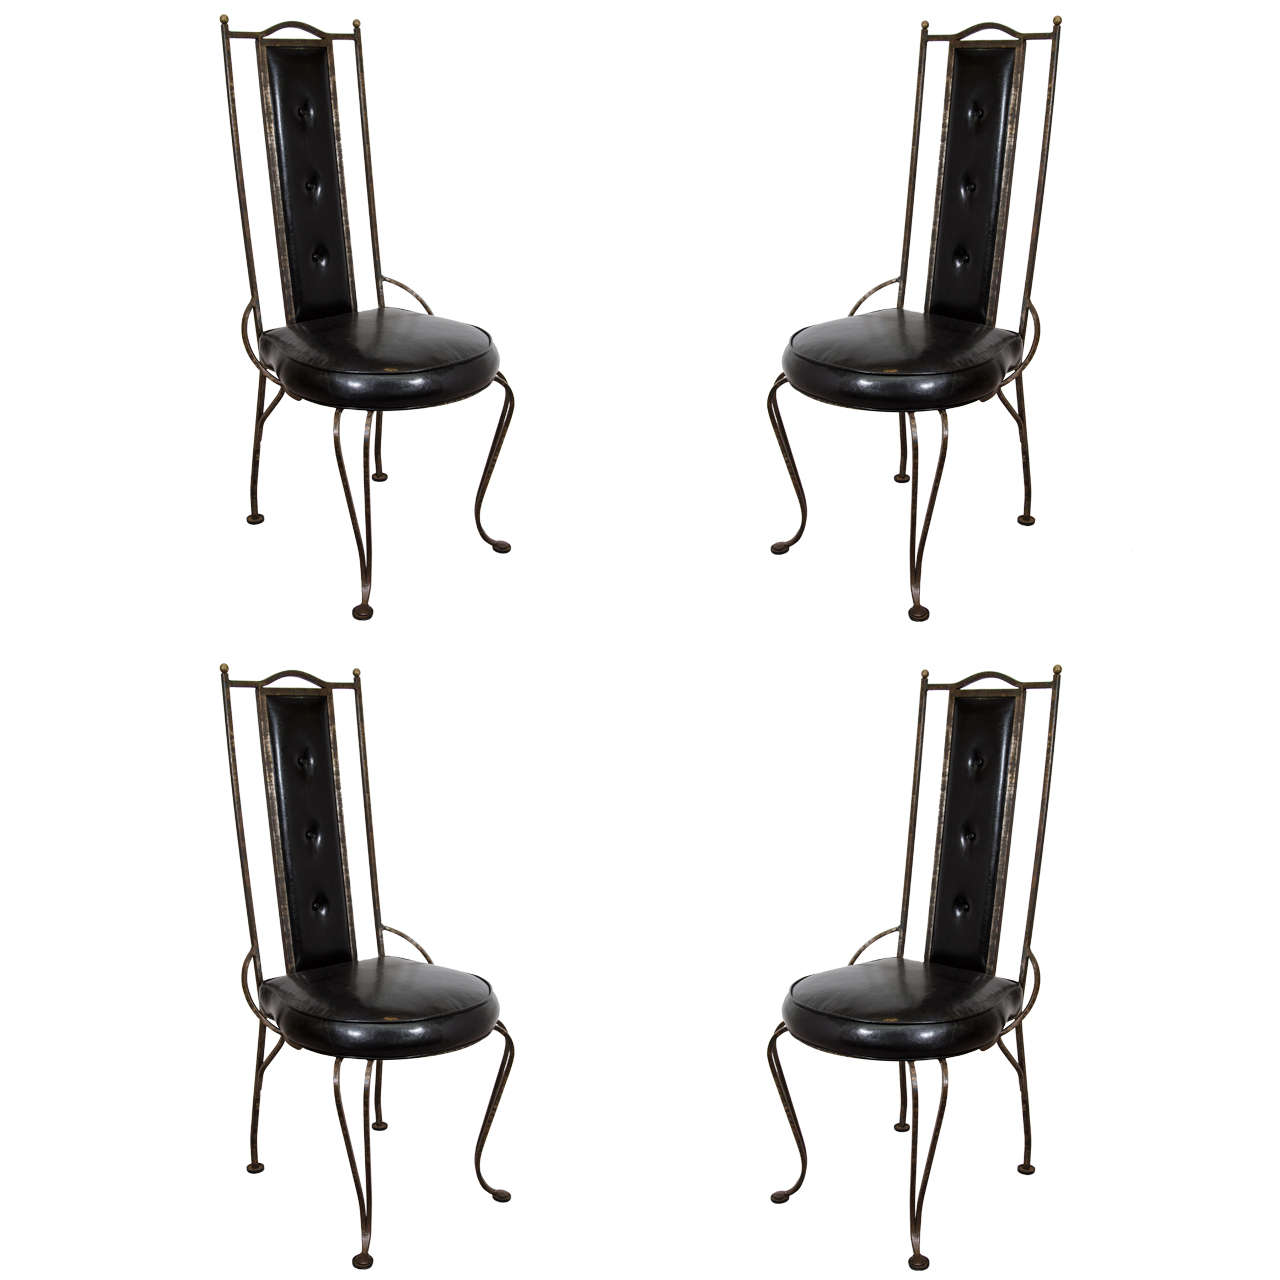 A Set of Four Mid Century Wrought Iron Dining Chairs